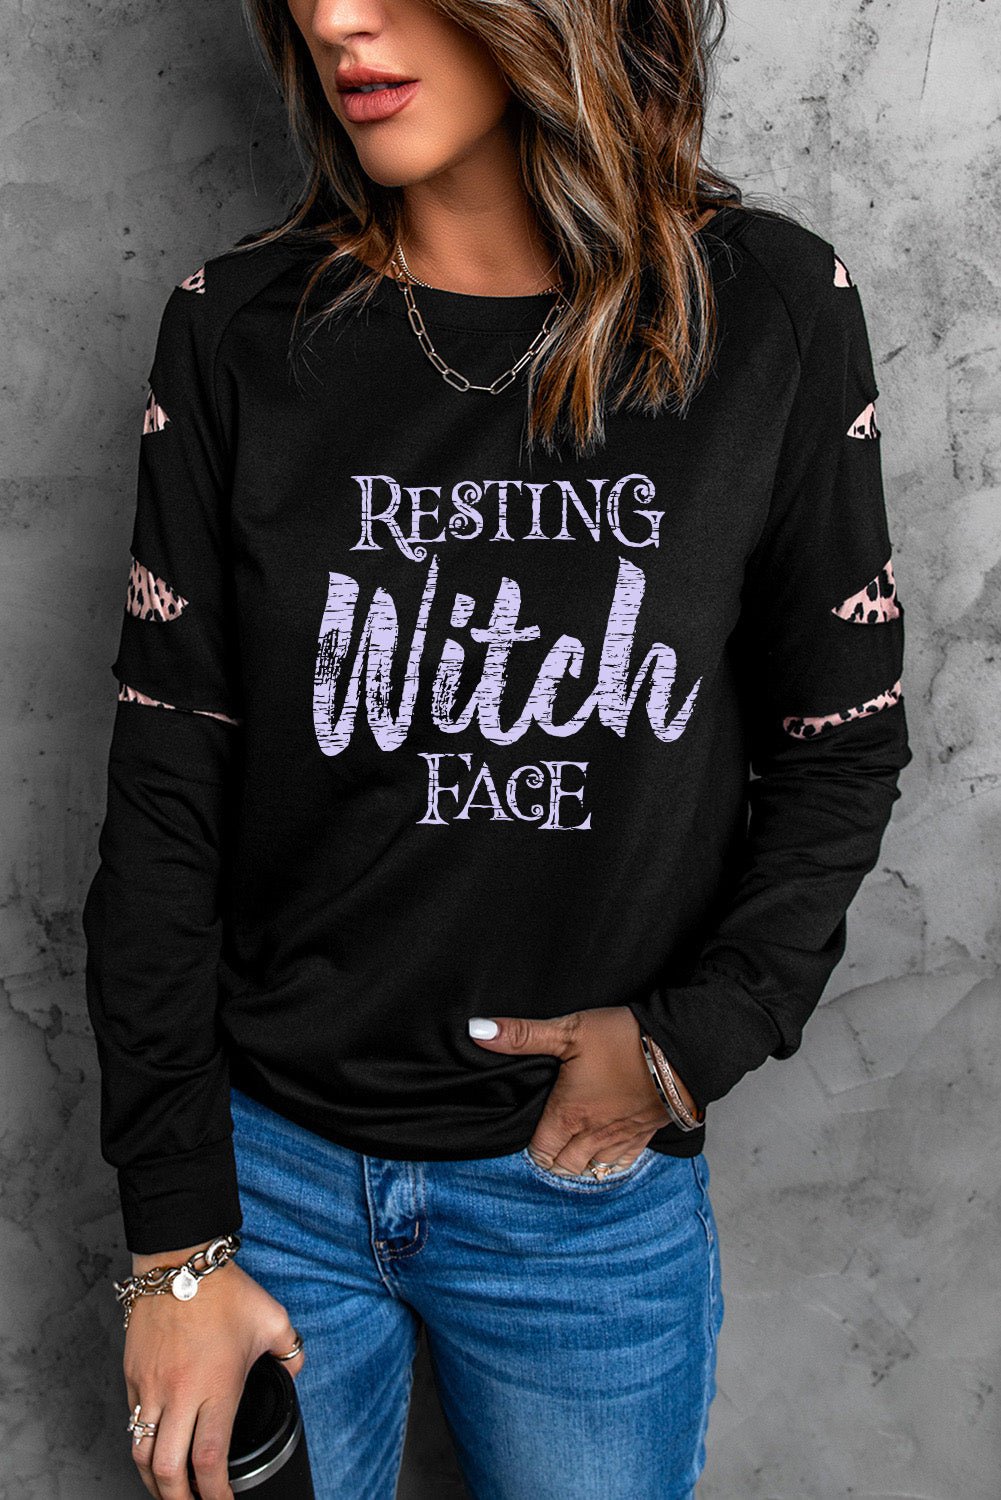 RESTING WITCH FACE Graphic Sweatshirt - GemThreads Boutique